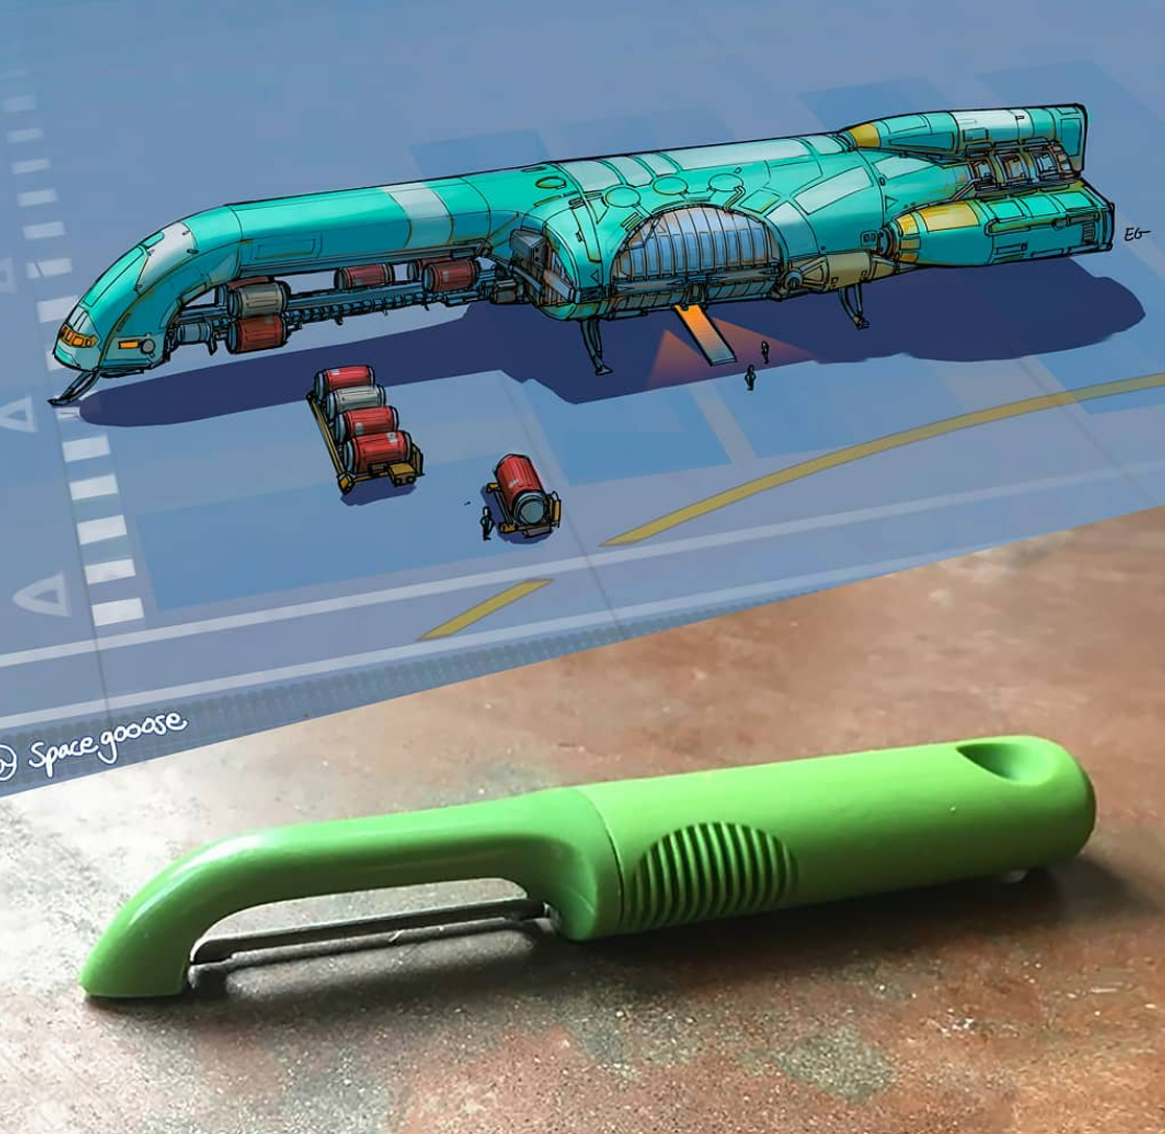 Artist Channels His Inner Space-Nerd and Transforms Regular Objects into Spaceships